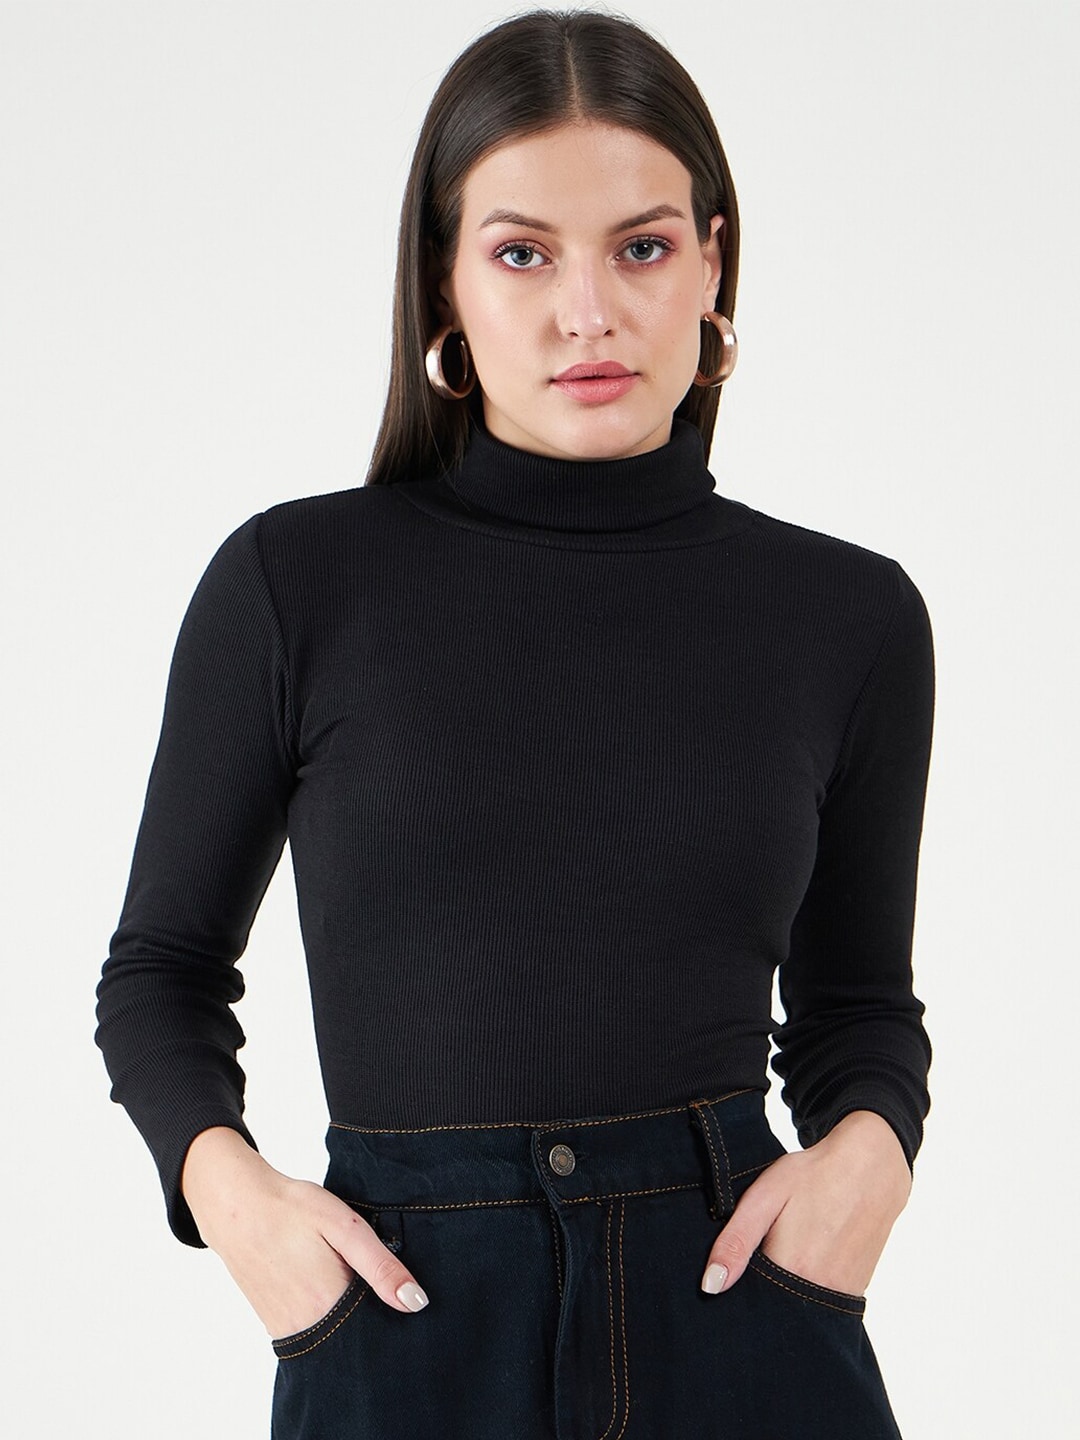 Bitterlime Long Sleeves Turtle Neck Cotton Fitted Top Price in India